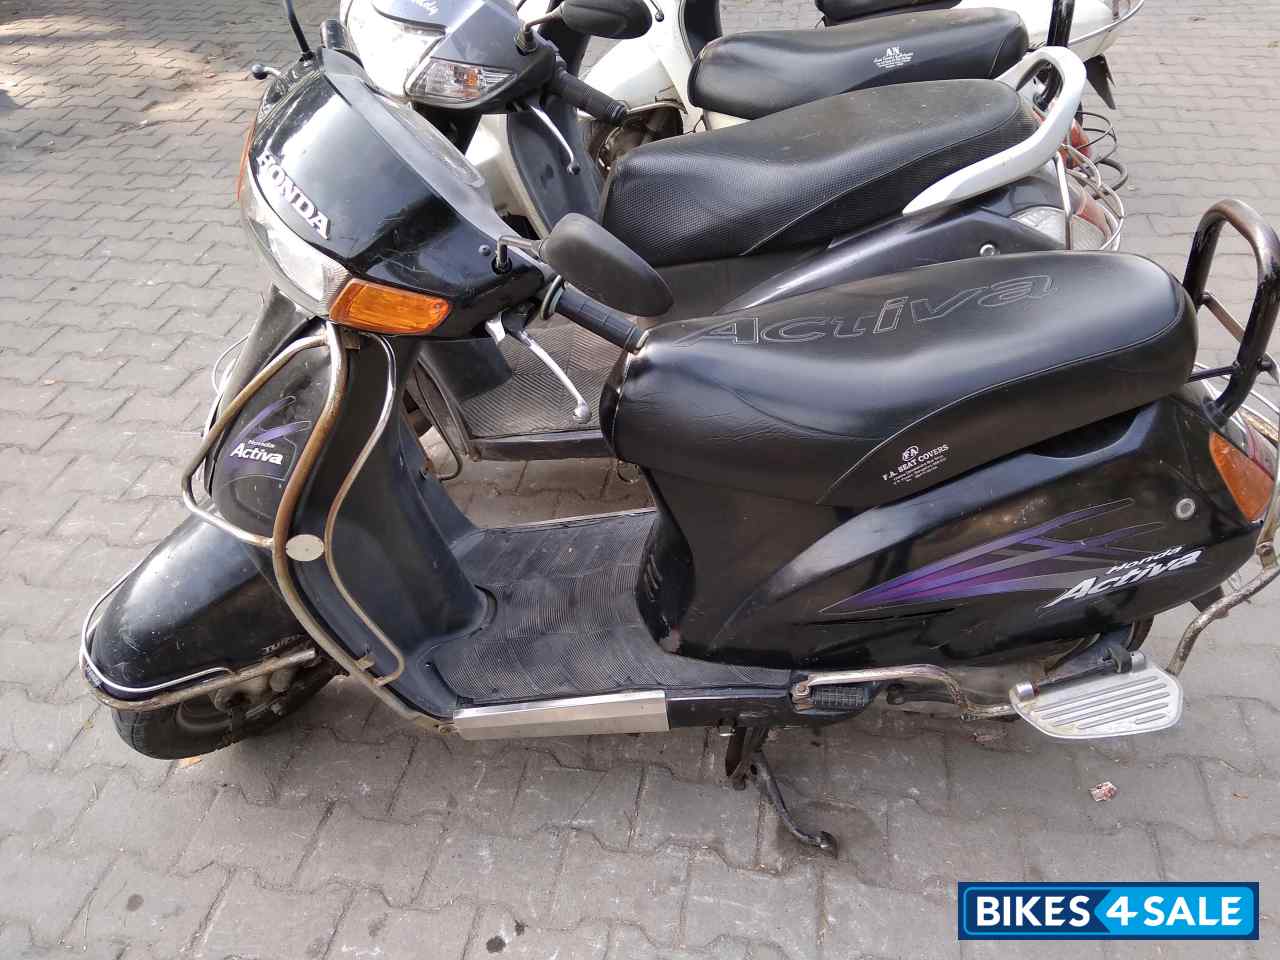 Used 2004 model Honda Activa for sale in Bangalore. ID ...